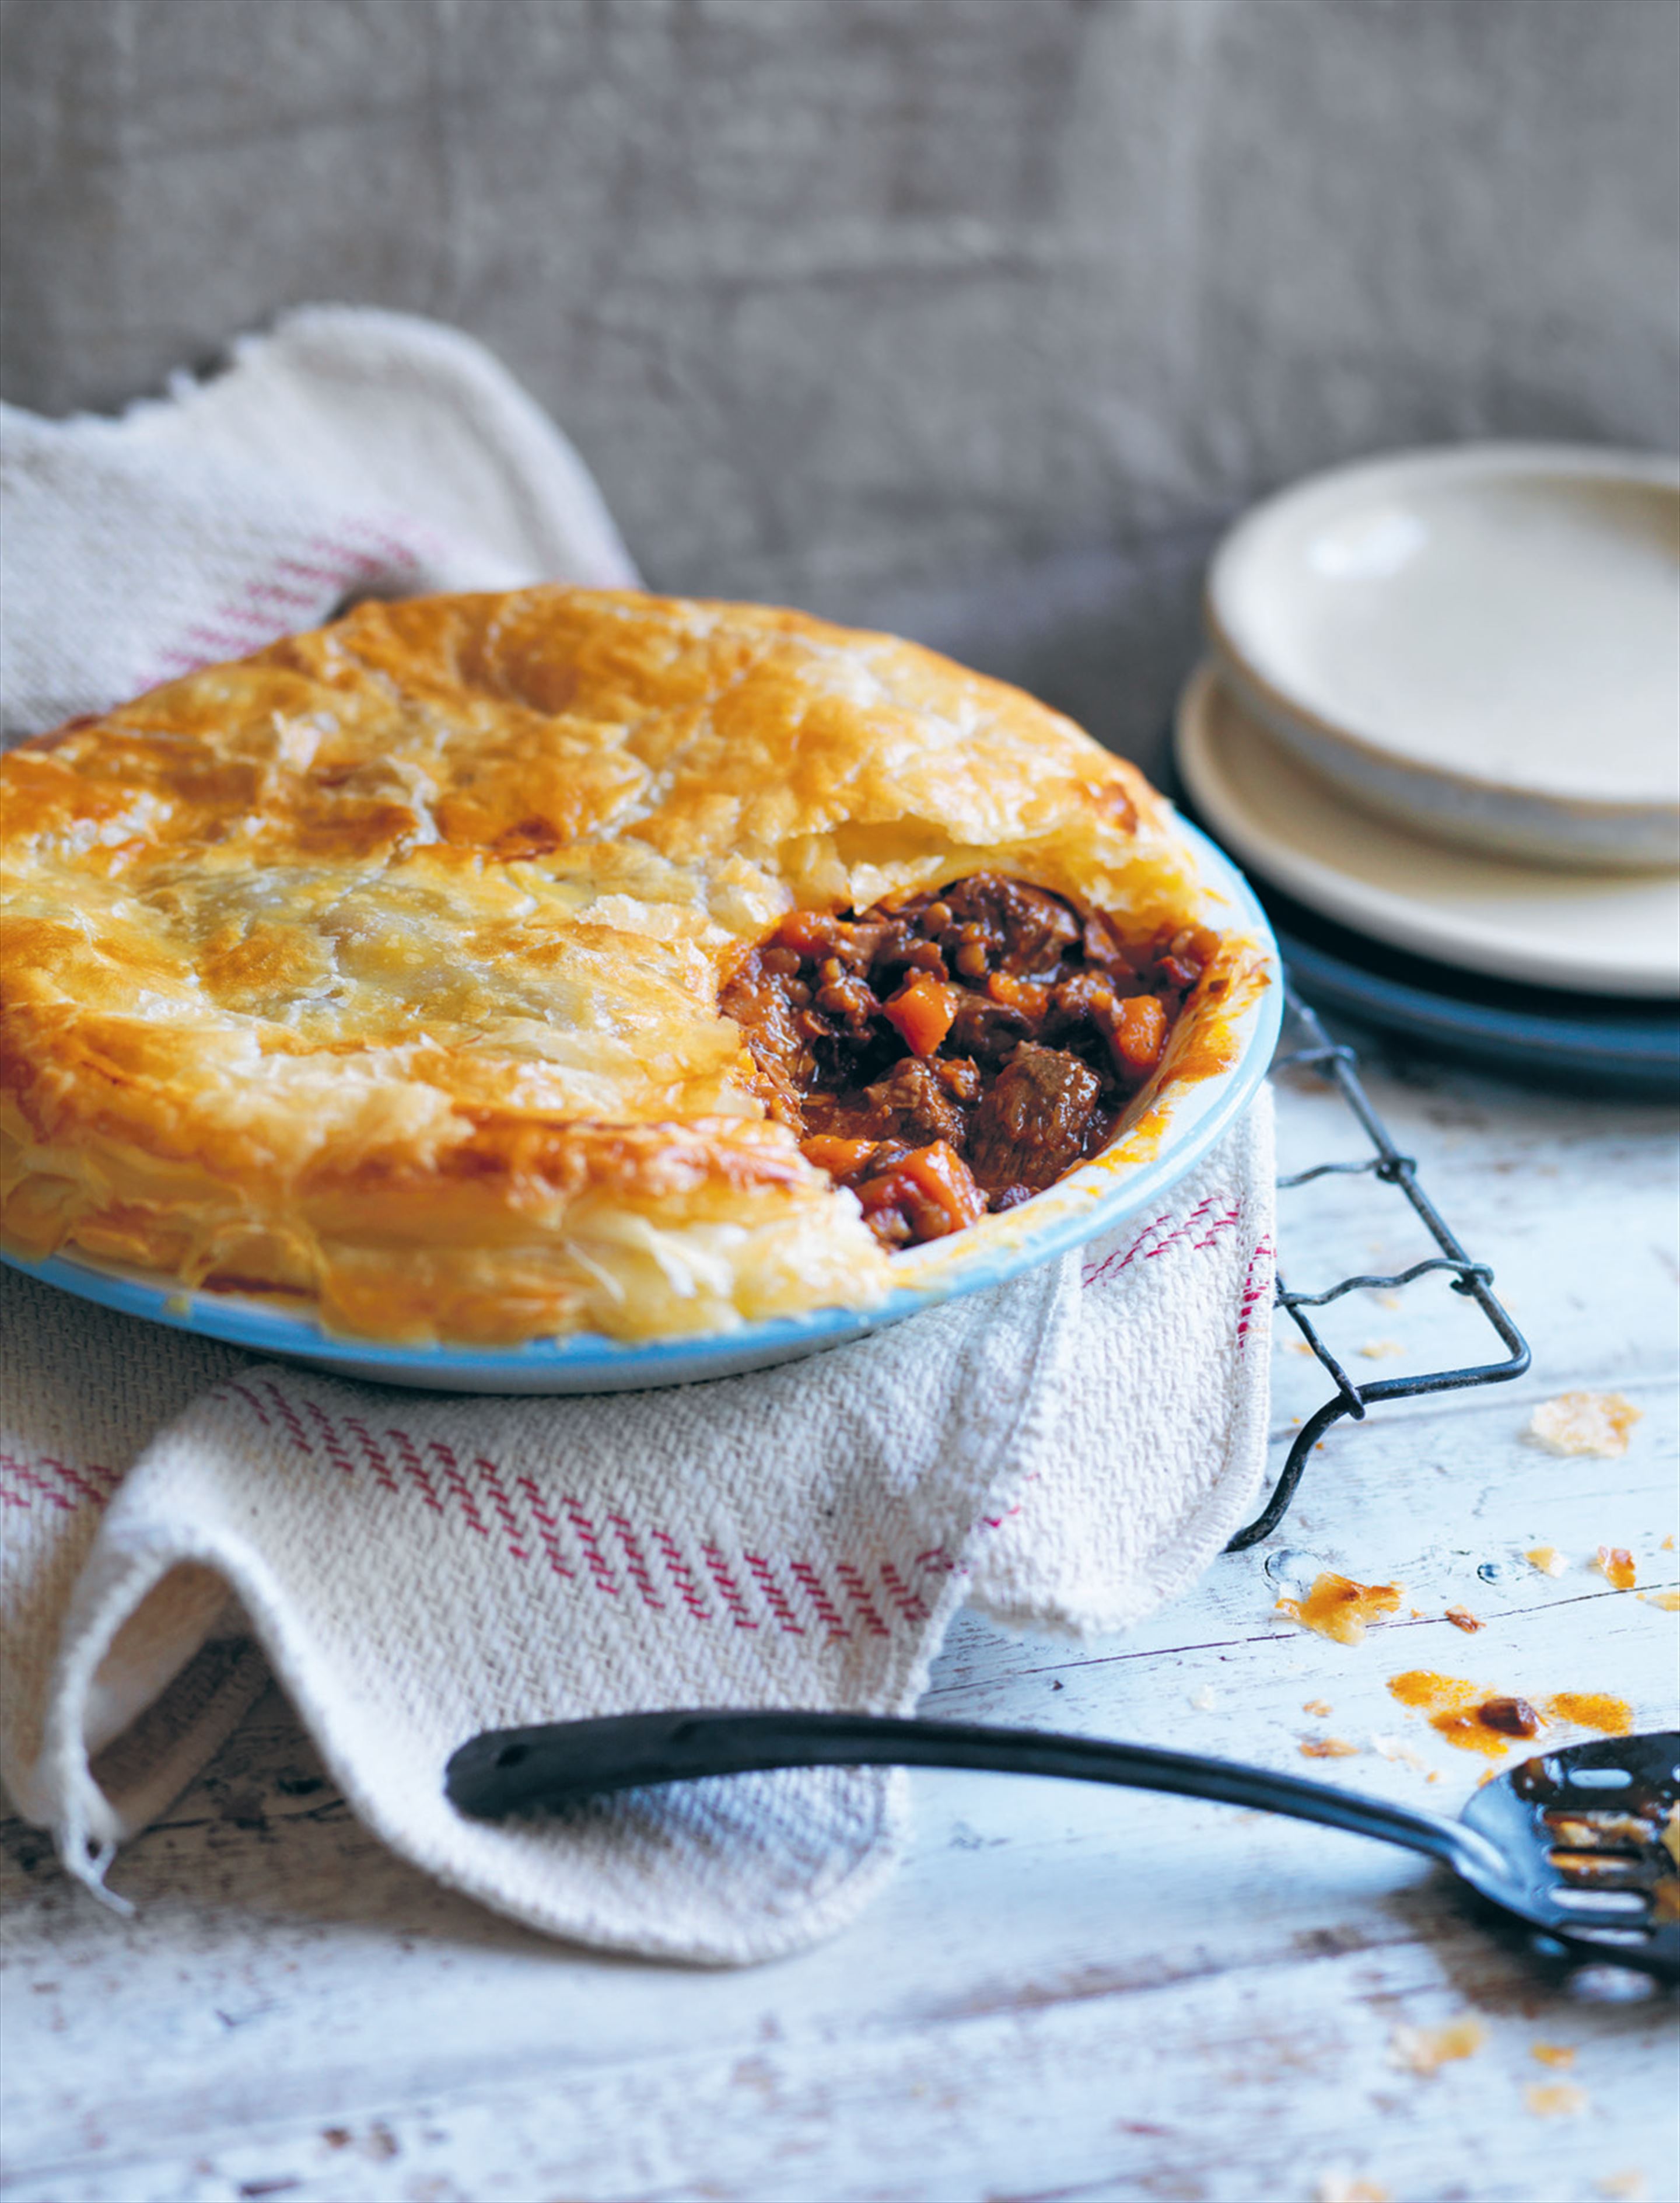 Beef and vegetable pie